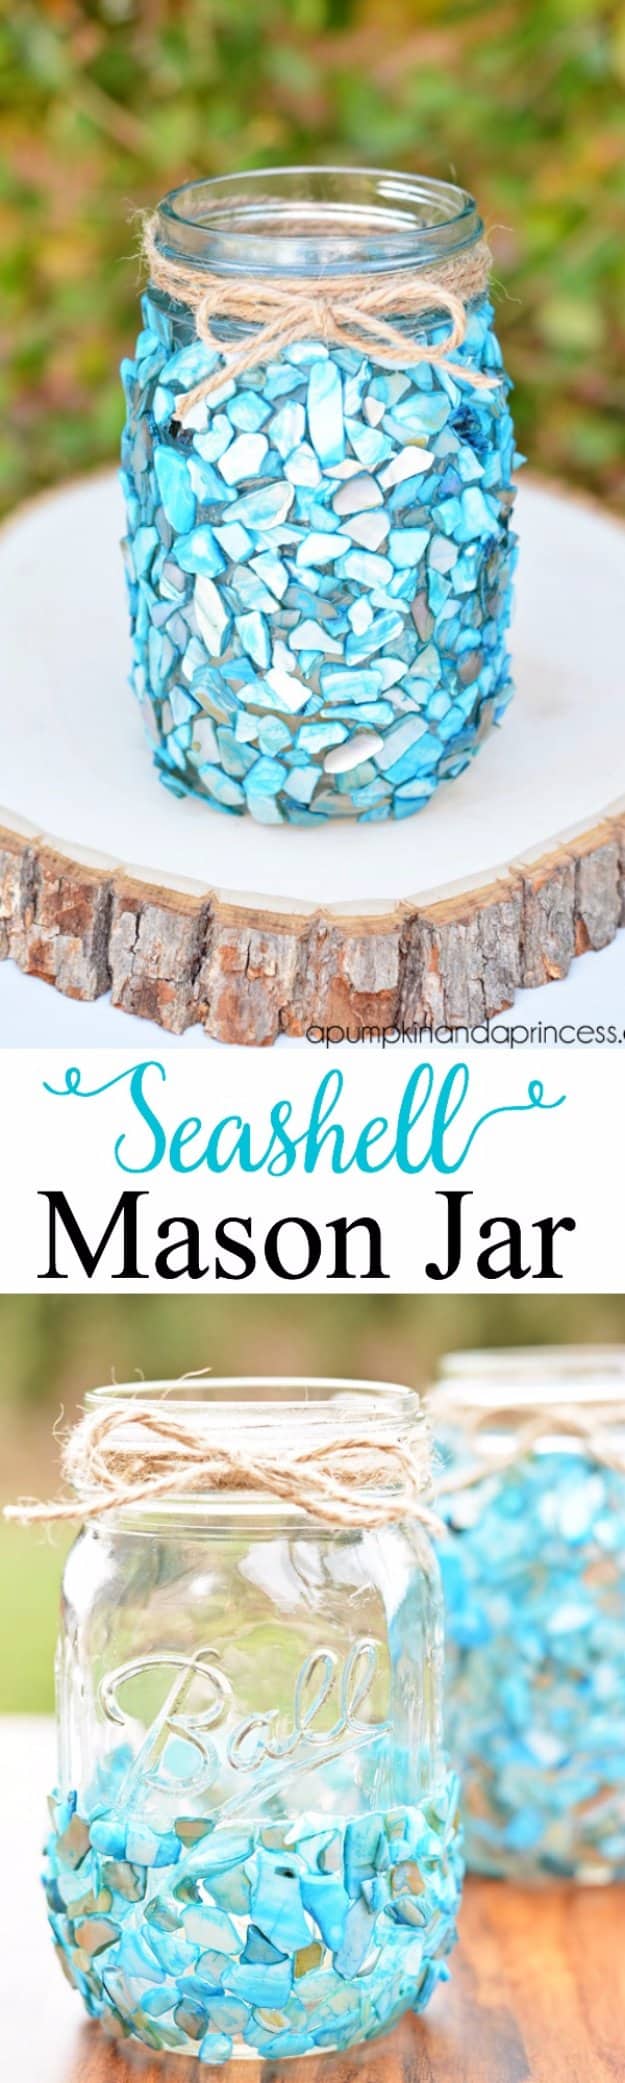 Mason Jar Ideas for Summer - Broken Seashell Mason Jar - Mason Jar Crafts, Decor and Gifts, Centerpieces and DIY Projects With Jars That Are Perfect For Summertime - Fun and Easy Lights, Cool Vases, Creative 4th of July Ideas